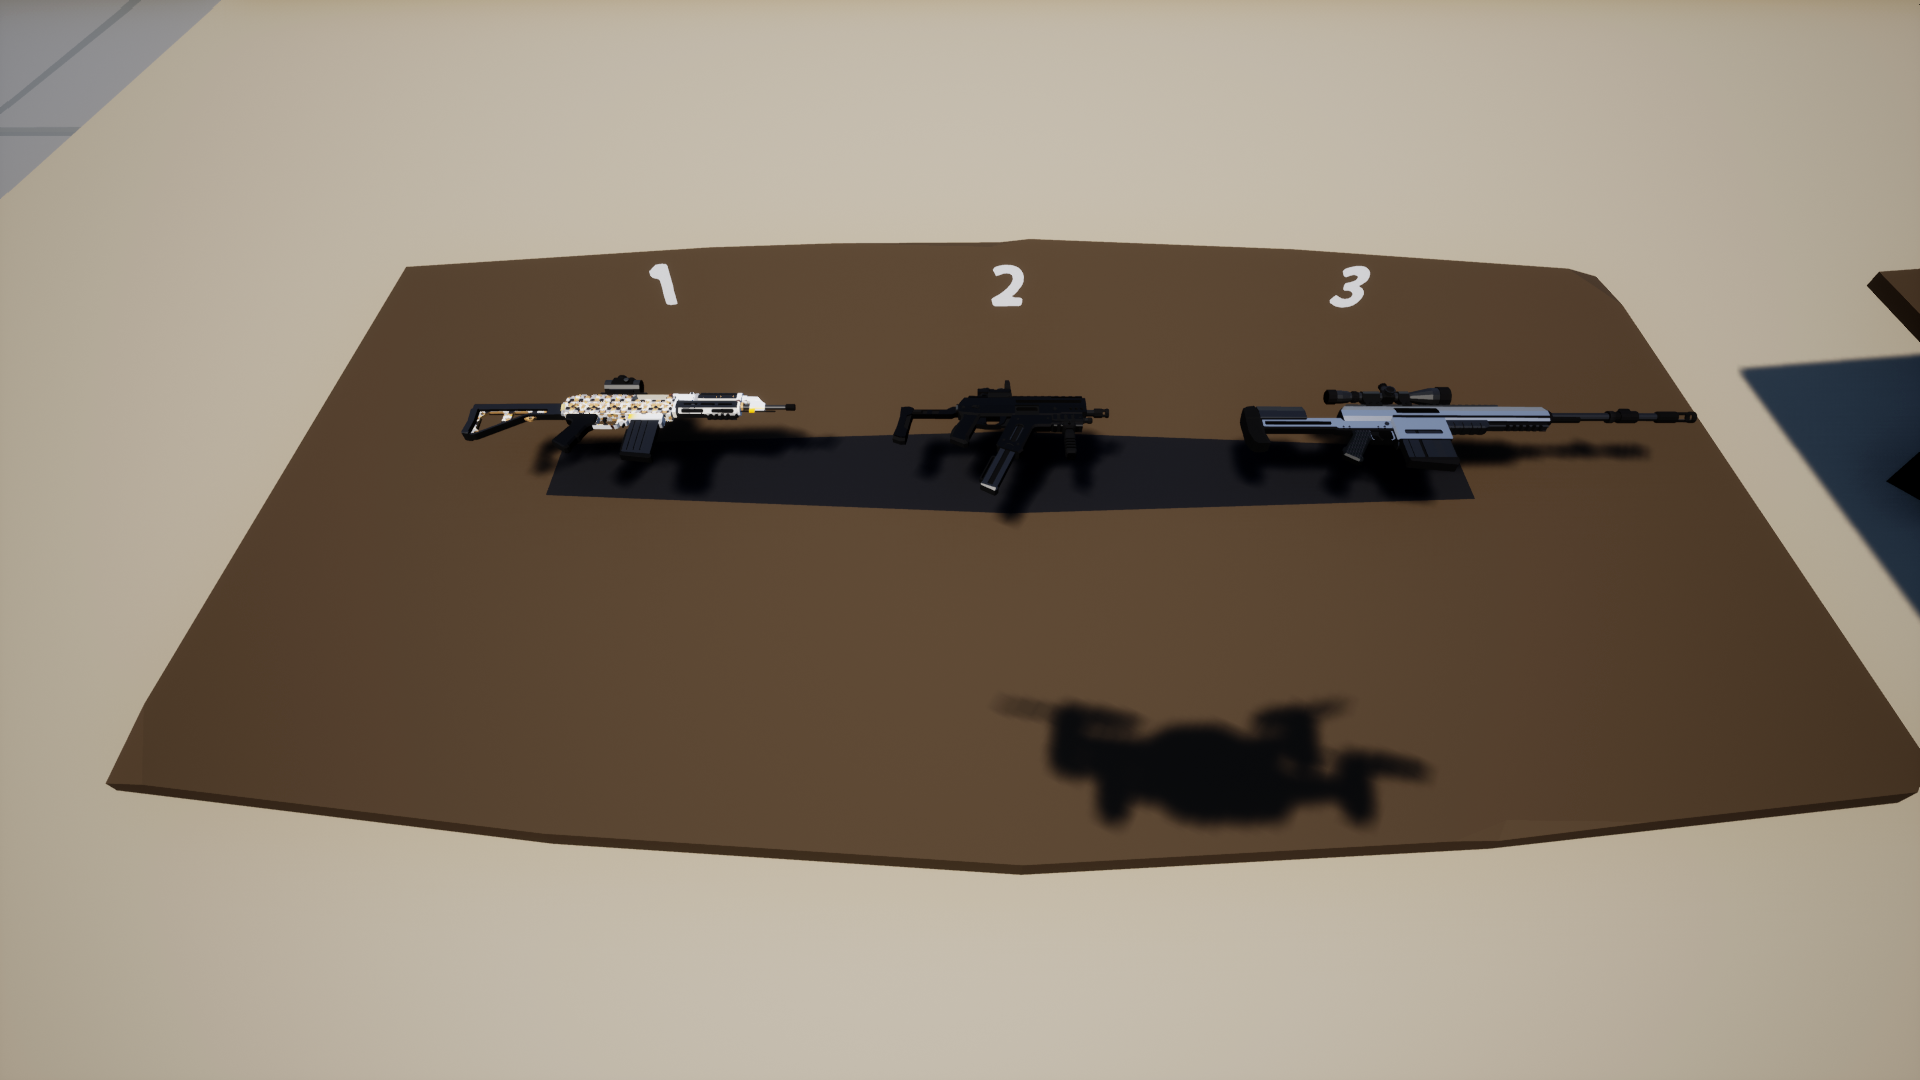 Perfect Heist 2 Level Editor Weapon Variant Selection - Weapons 1, 2, 3. - B39DCCE